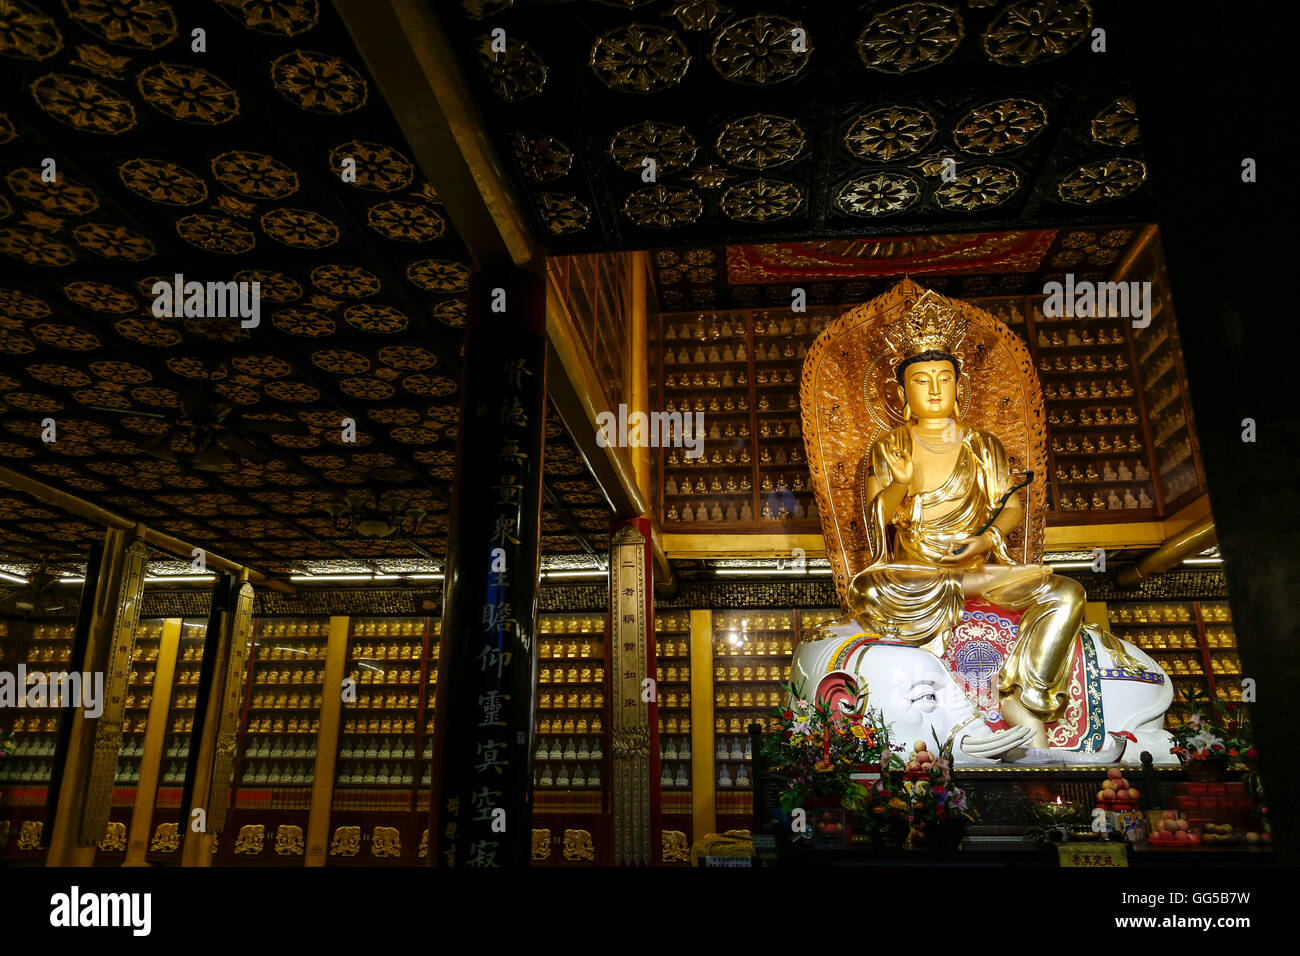 Buddha statue and ornate decorations in one of the halls at Baoguo Temple, Mt. Emei, Leshan, Sichuan, China. Stock Photo